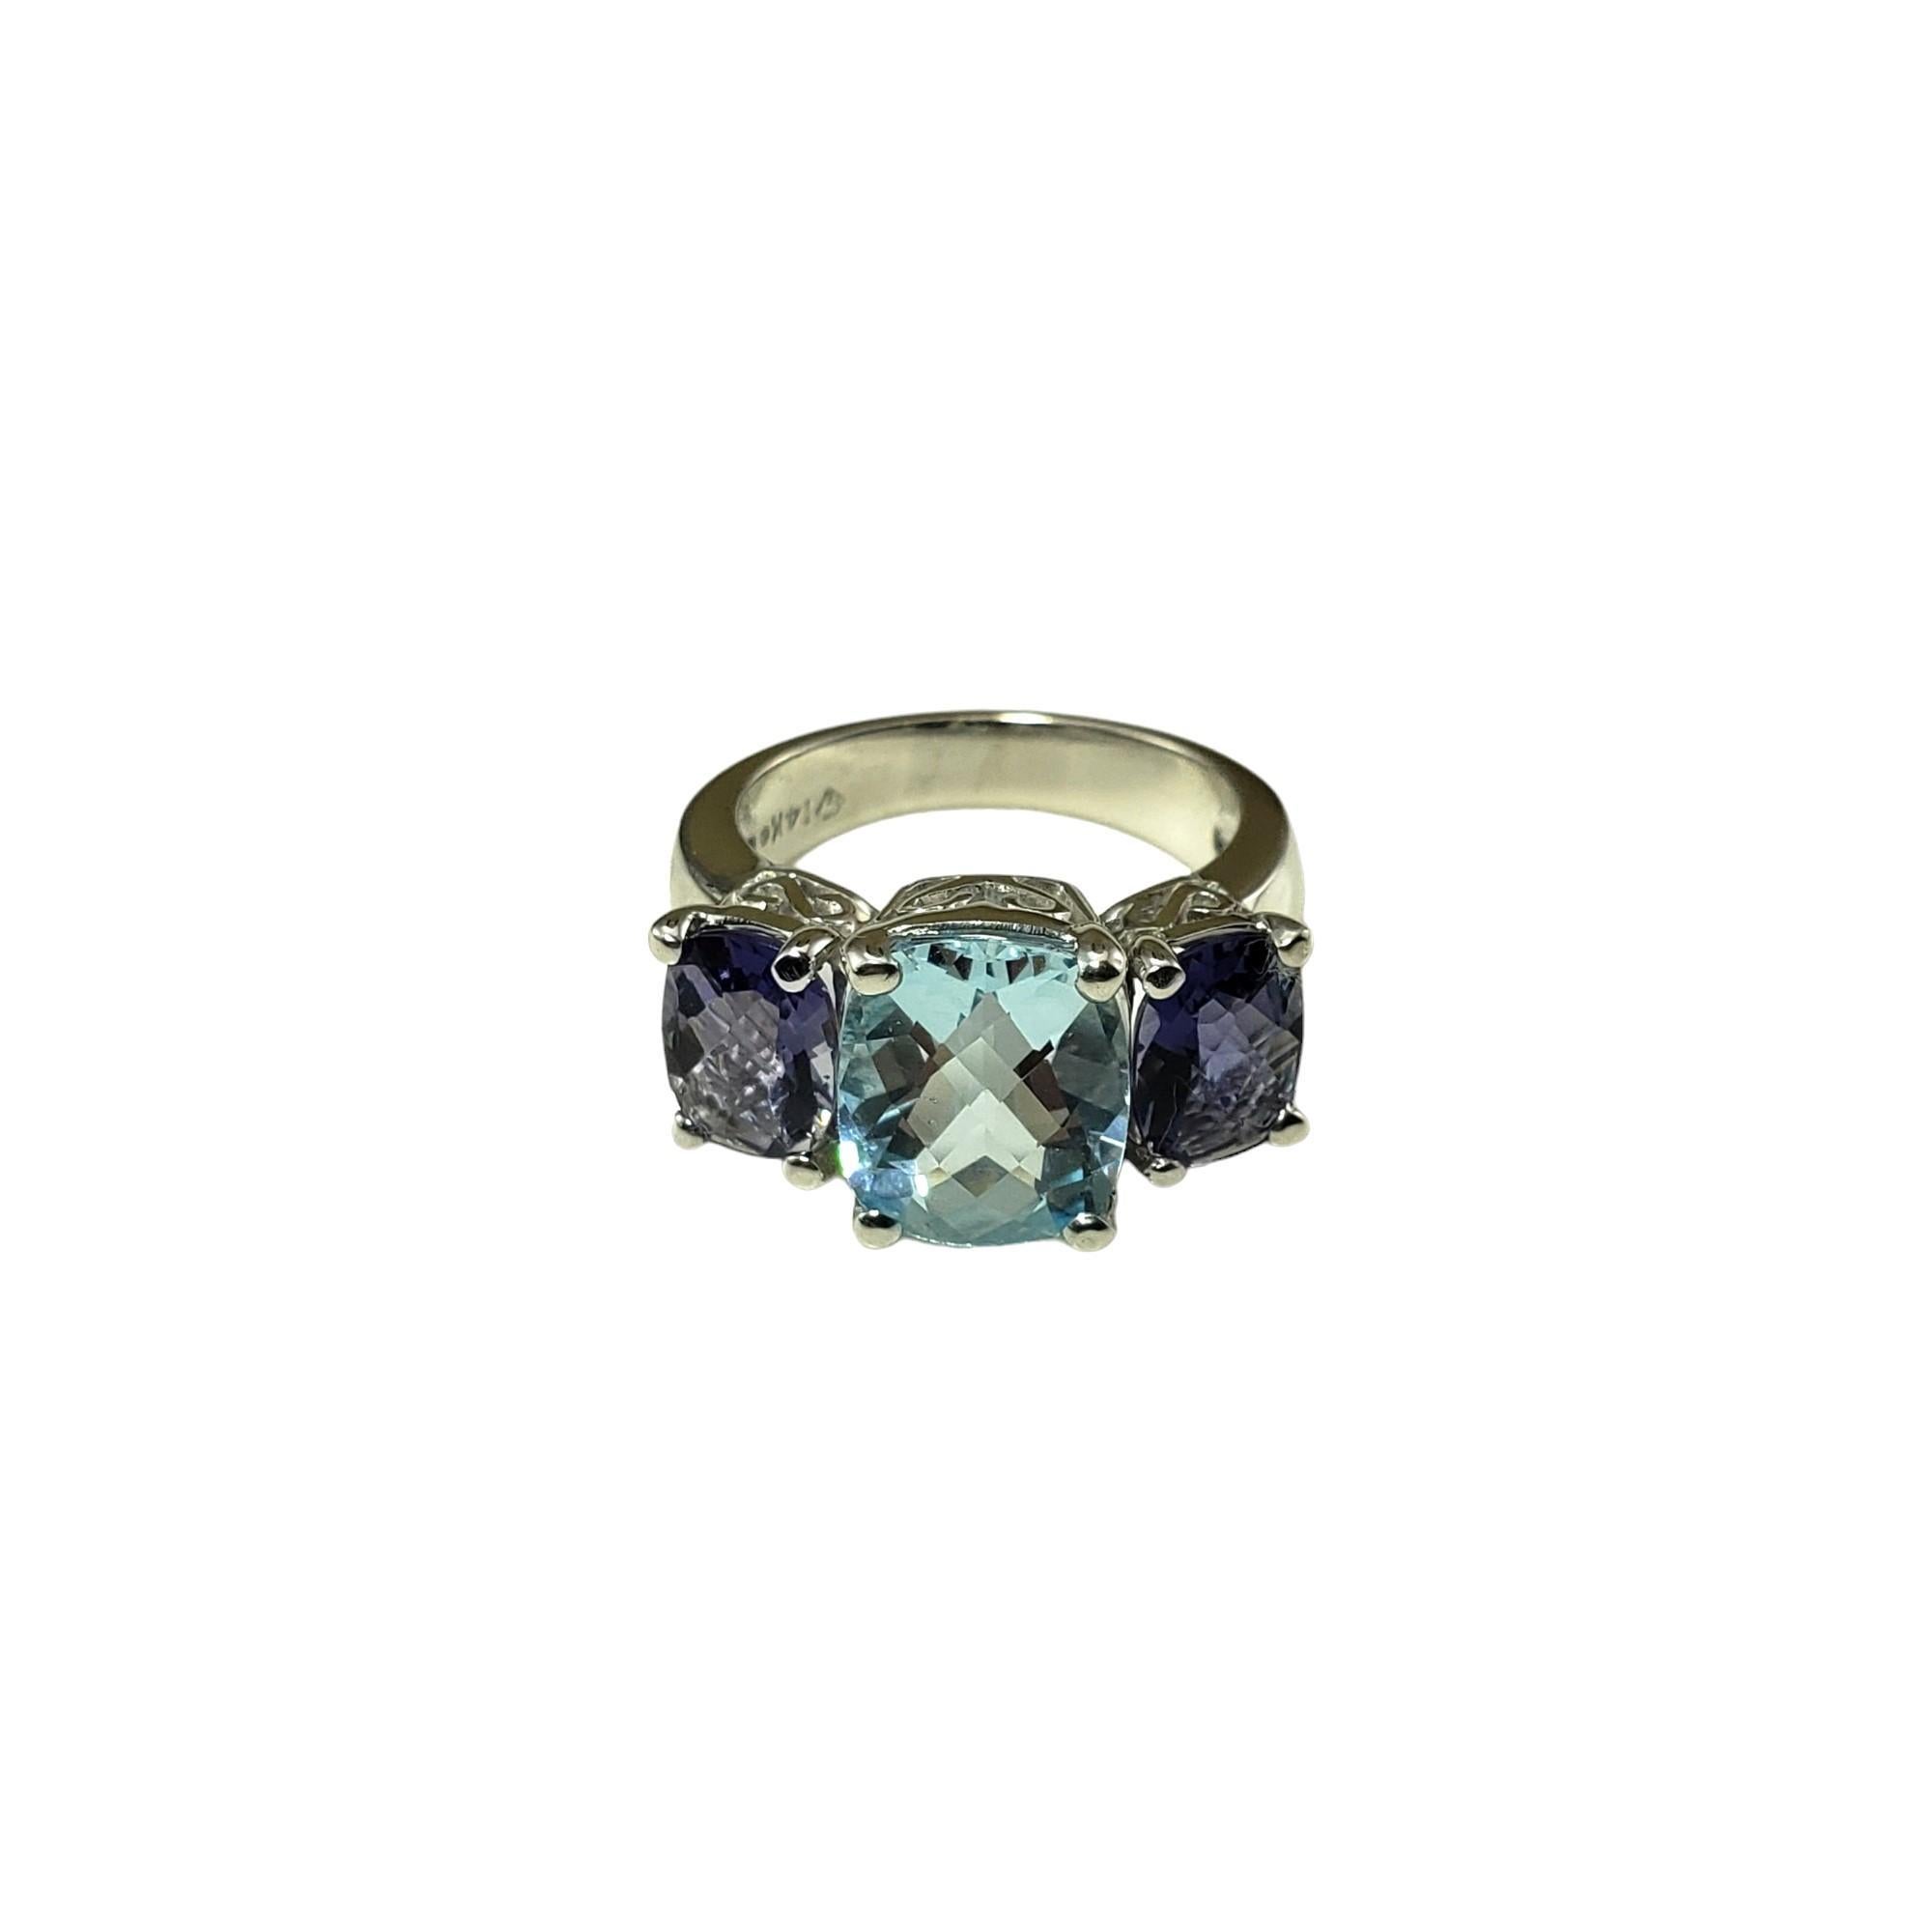 Vintage 14K White Gold Aquamarine and Tanzanite Ring Size 6.5 JAGi Certified-

This elegant ring features one rectangular cushion cut aquamarine and two cushion cut tanzanite stones set in classic 14K white gold.  Width: 11 mm.
Shank: 4